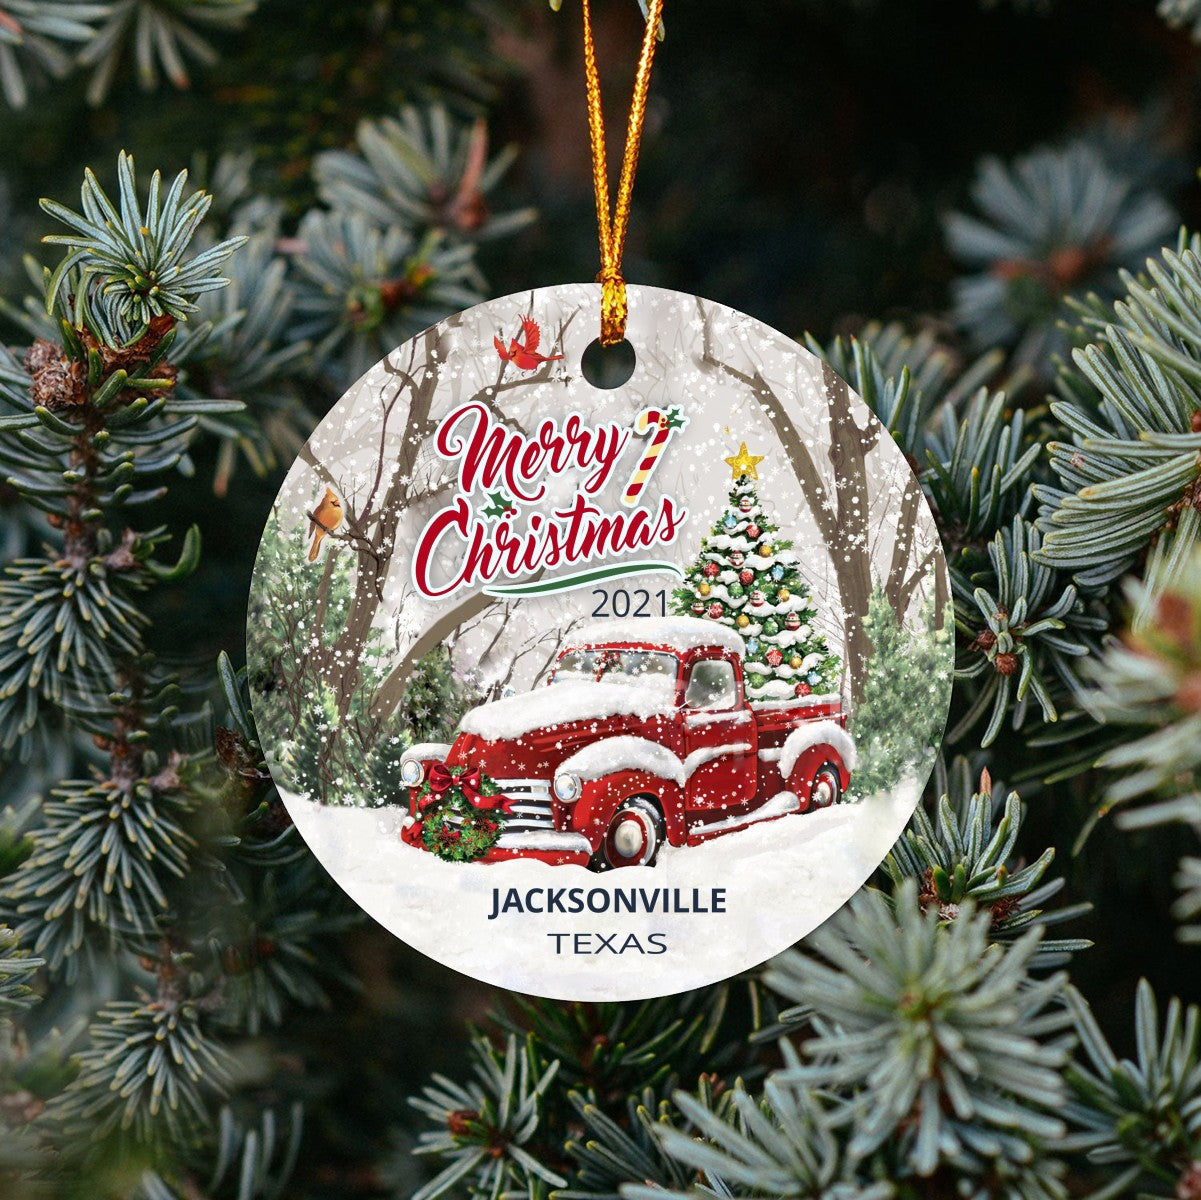 Christmas Tree Ornaments Jacksonville - Ornament With Name City, State Jacksonville Texas TX Ornament - Red Truck Xmas Ornaments 3'' Plastic Gift For Family, Friend And Housewarming